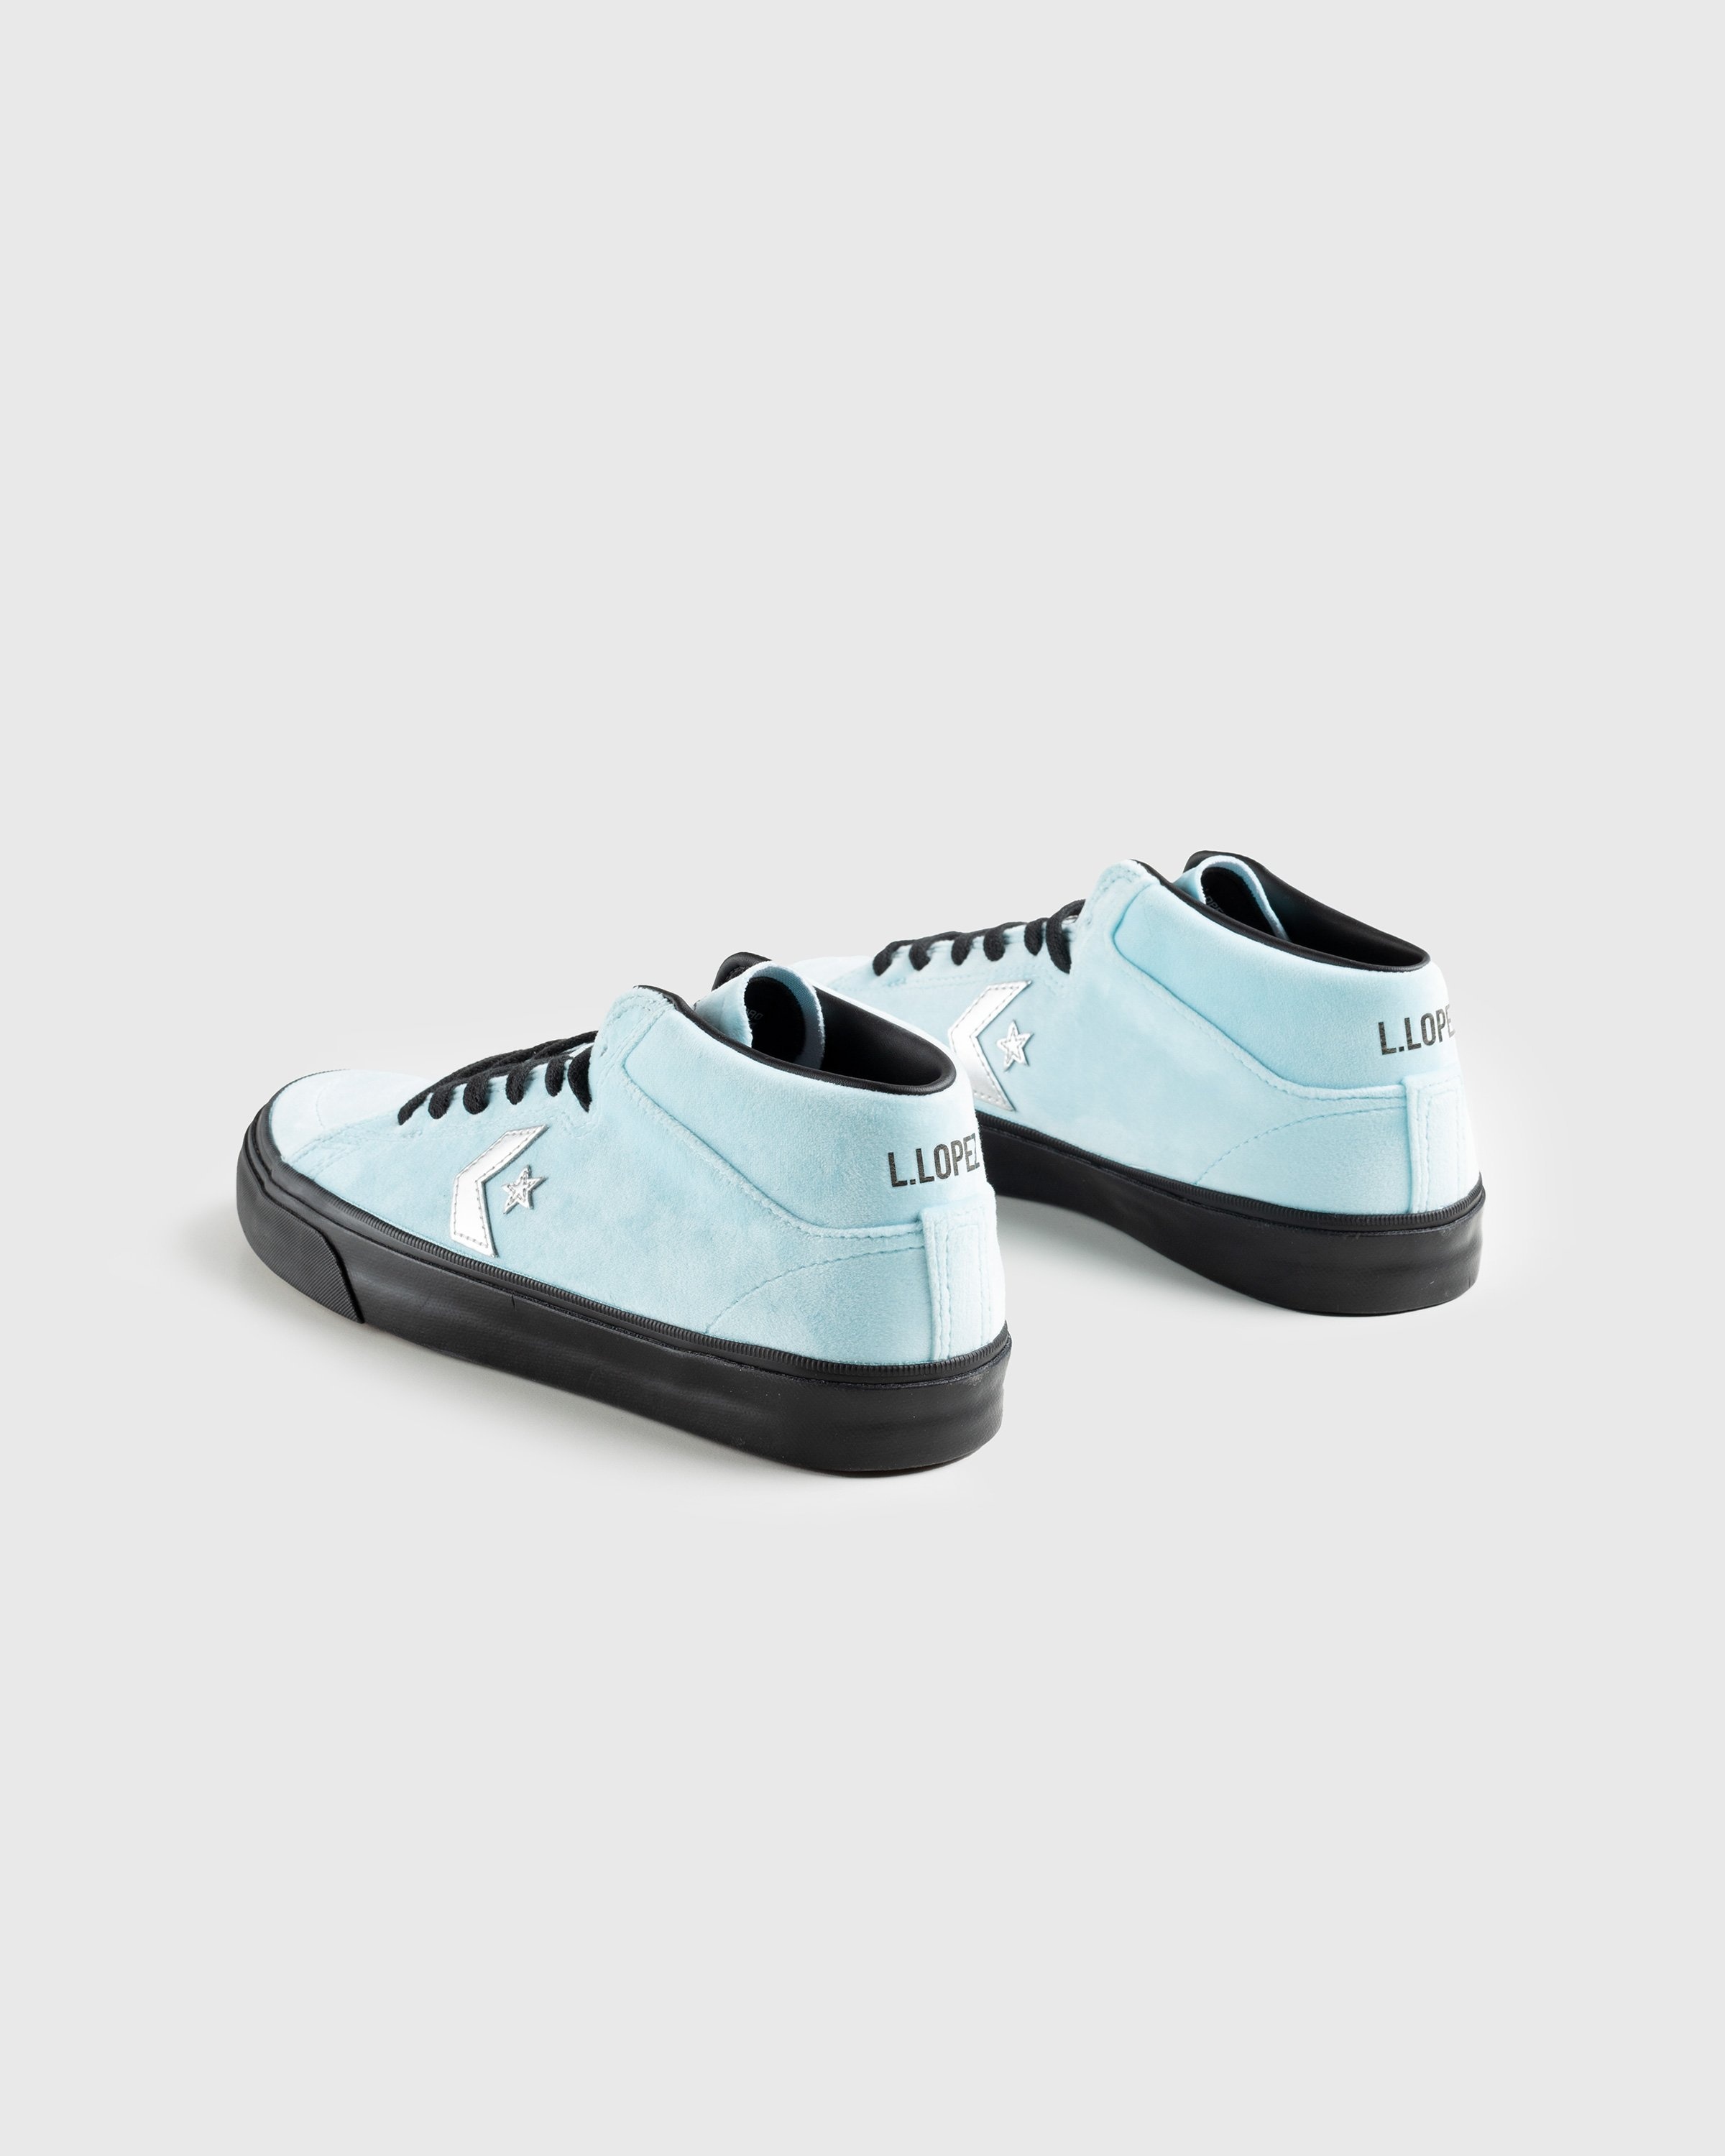 Converse x Fucking Awesome – Louie Lopez Pro Mid Cyan Tint/Black - High Top Sneakers - Blue - Image 4